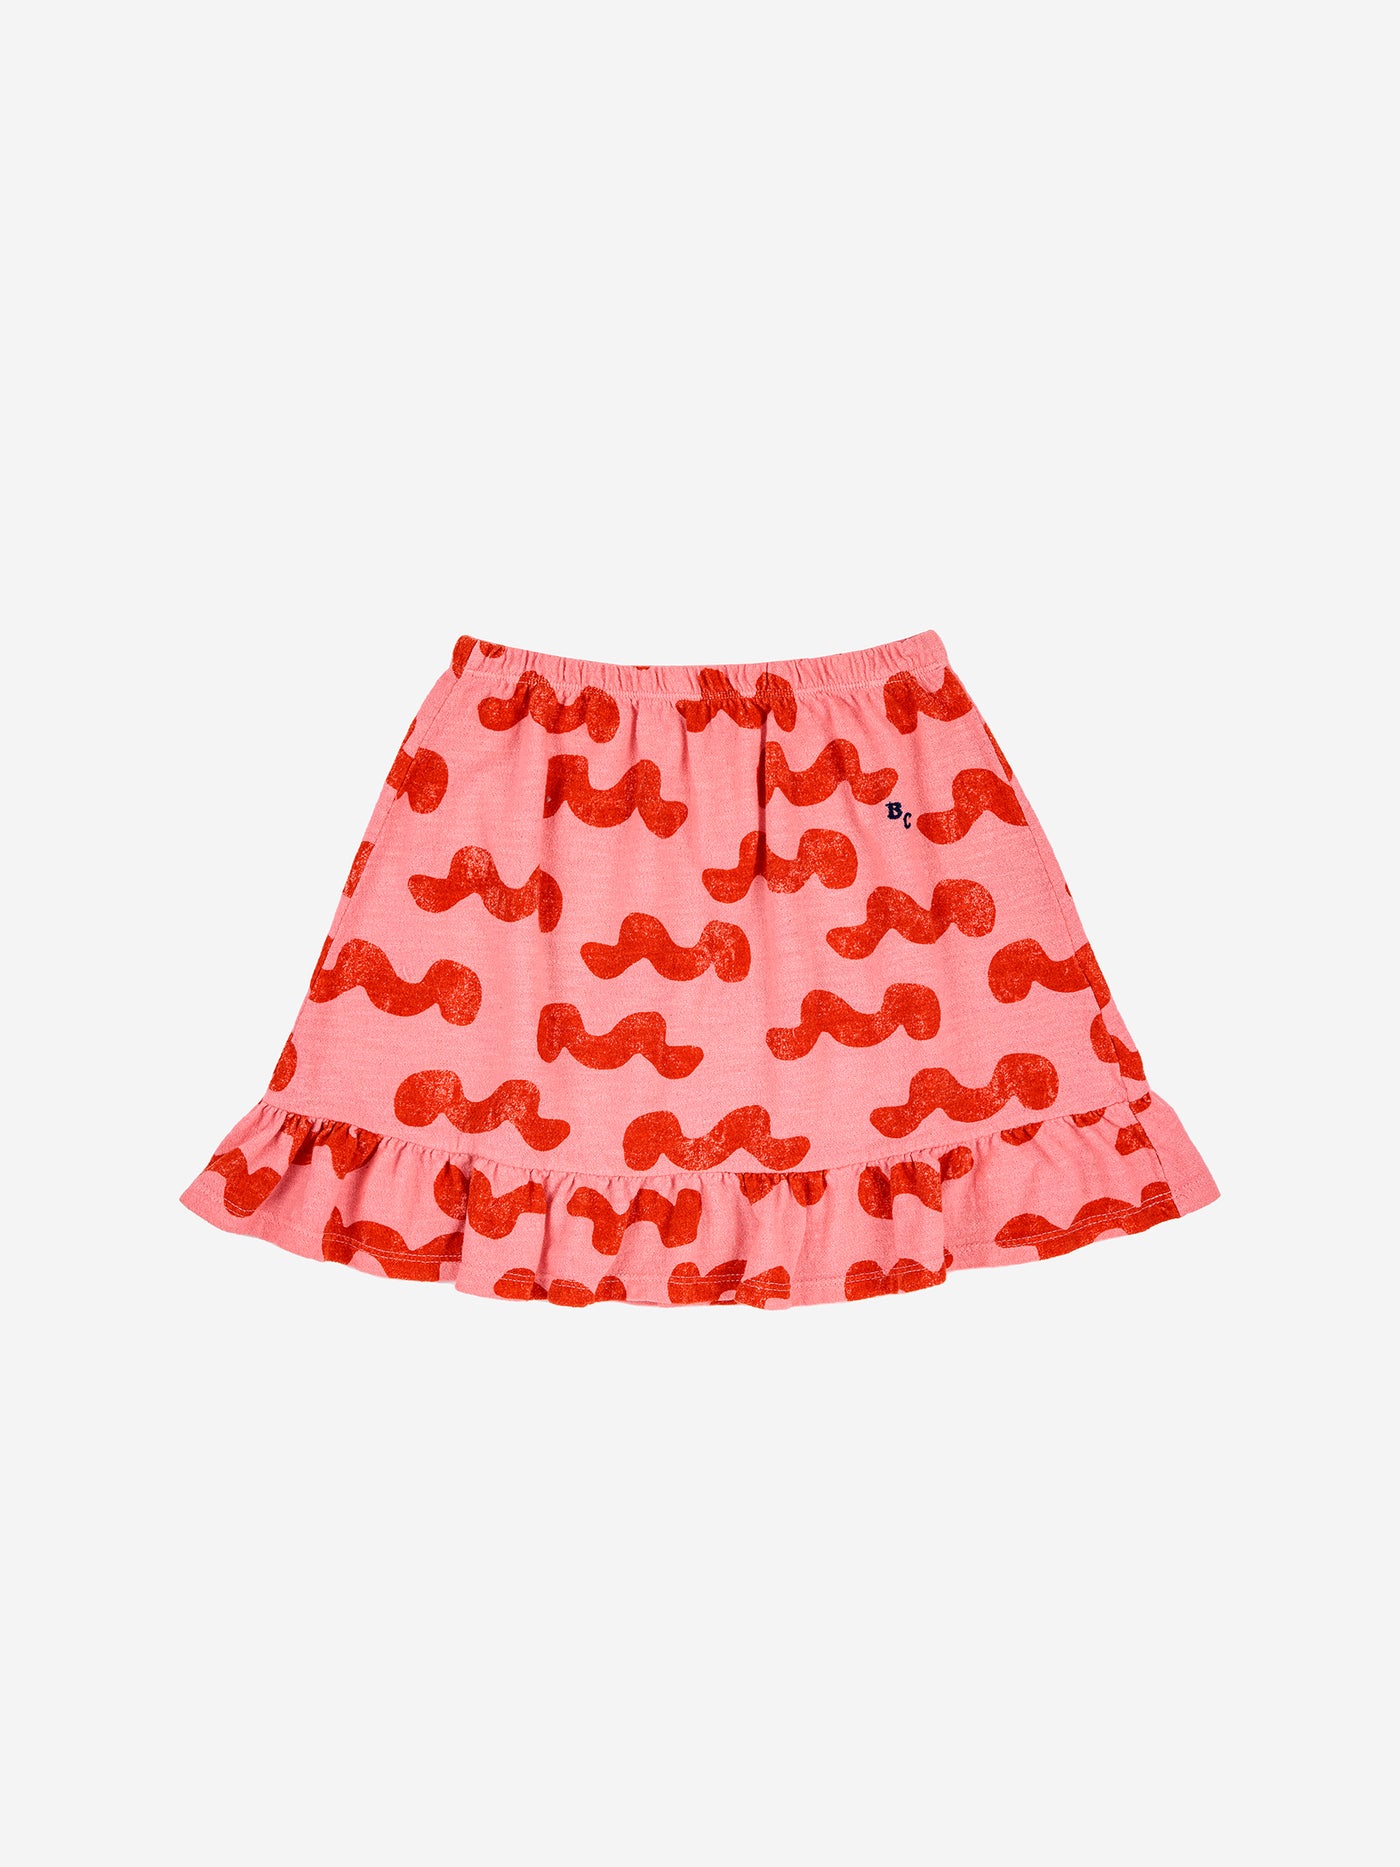 Waves Skirt - COCO LETO